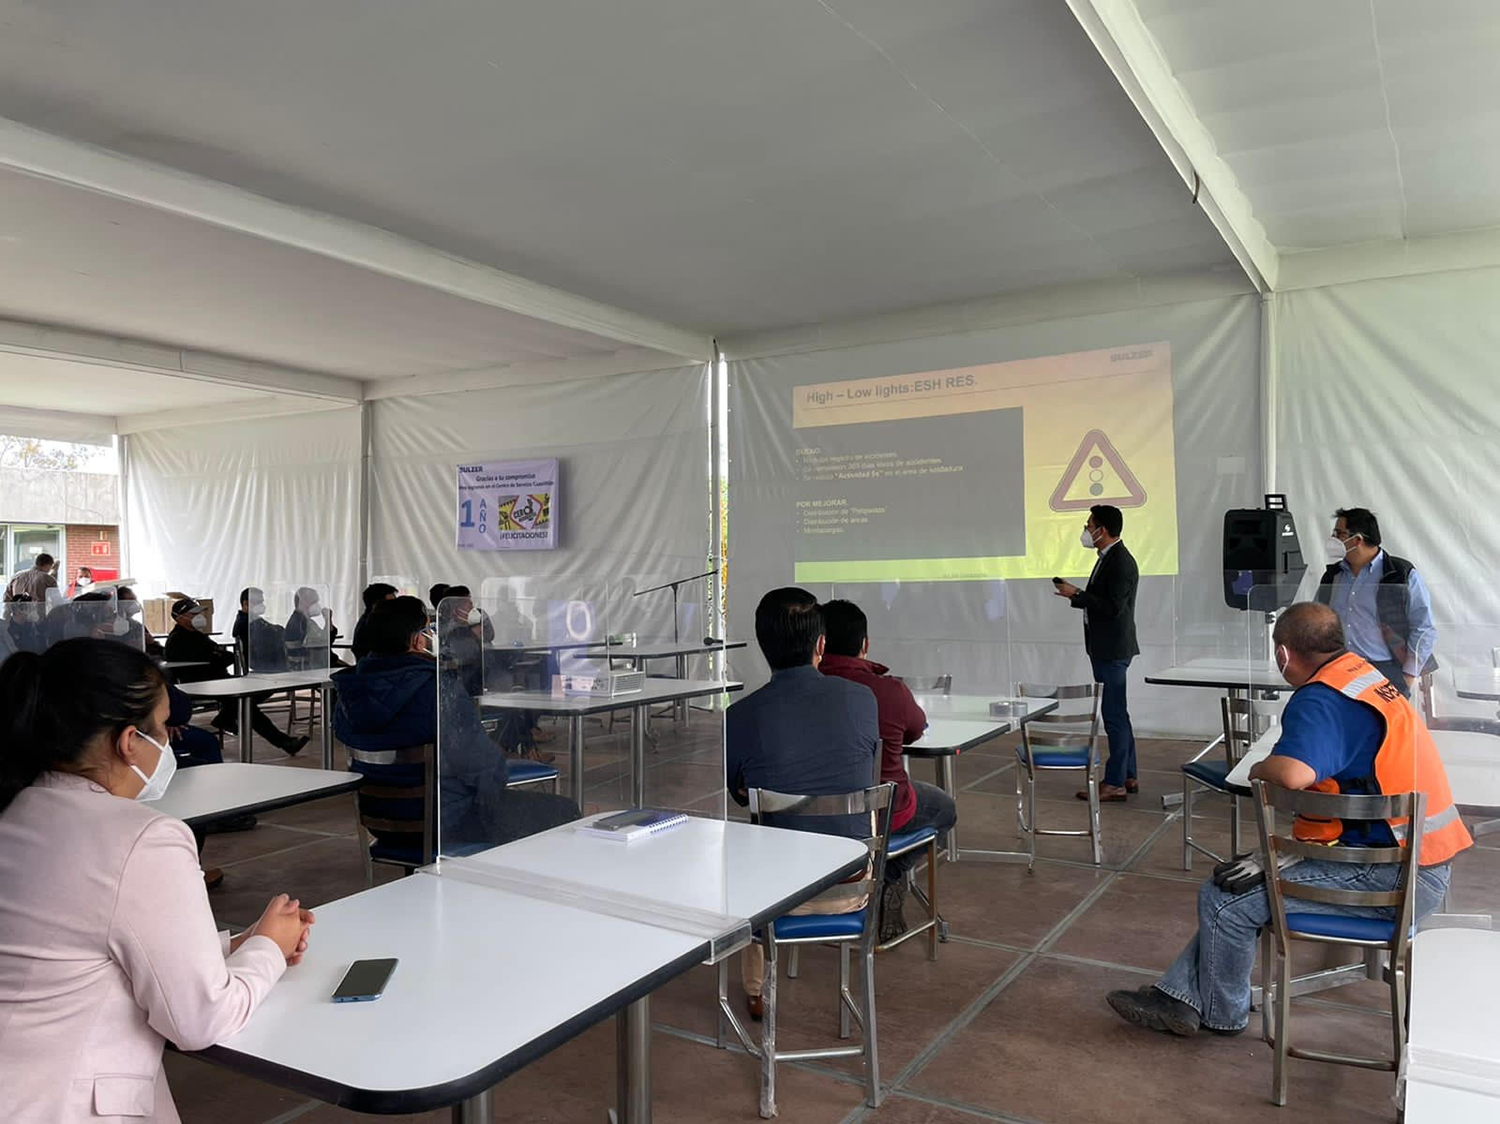 The achievement was marked with a Townhall celebration at the site, during which Flavio Romero, Head of RES PS AME Operations at Sulzer, congratulated the staff for their cooperation and support.